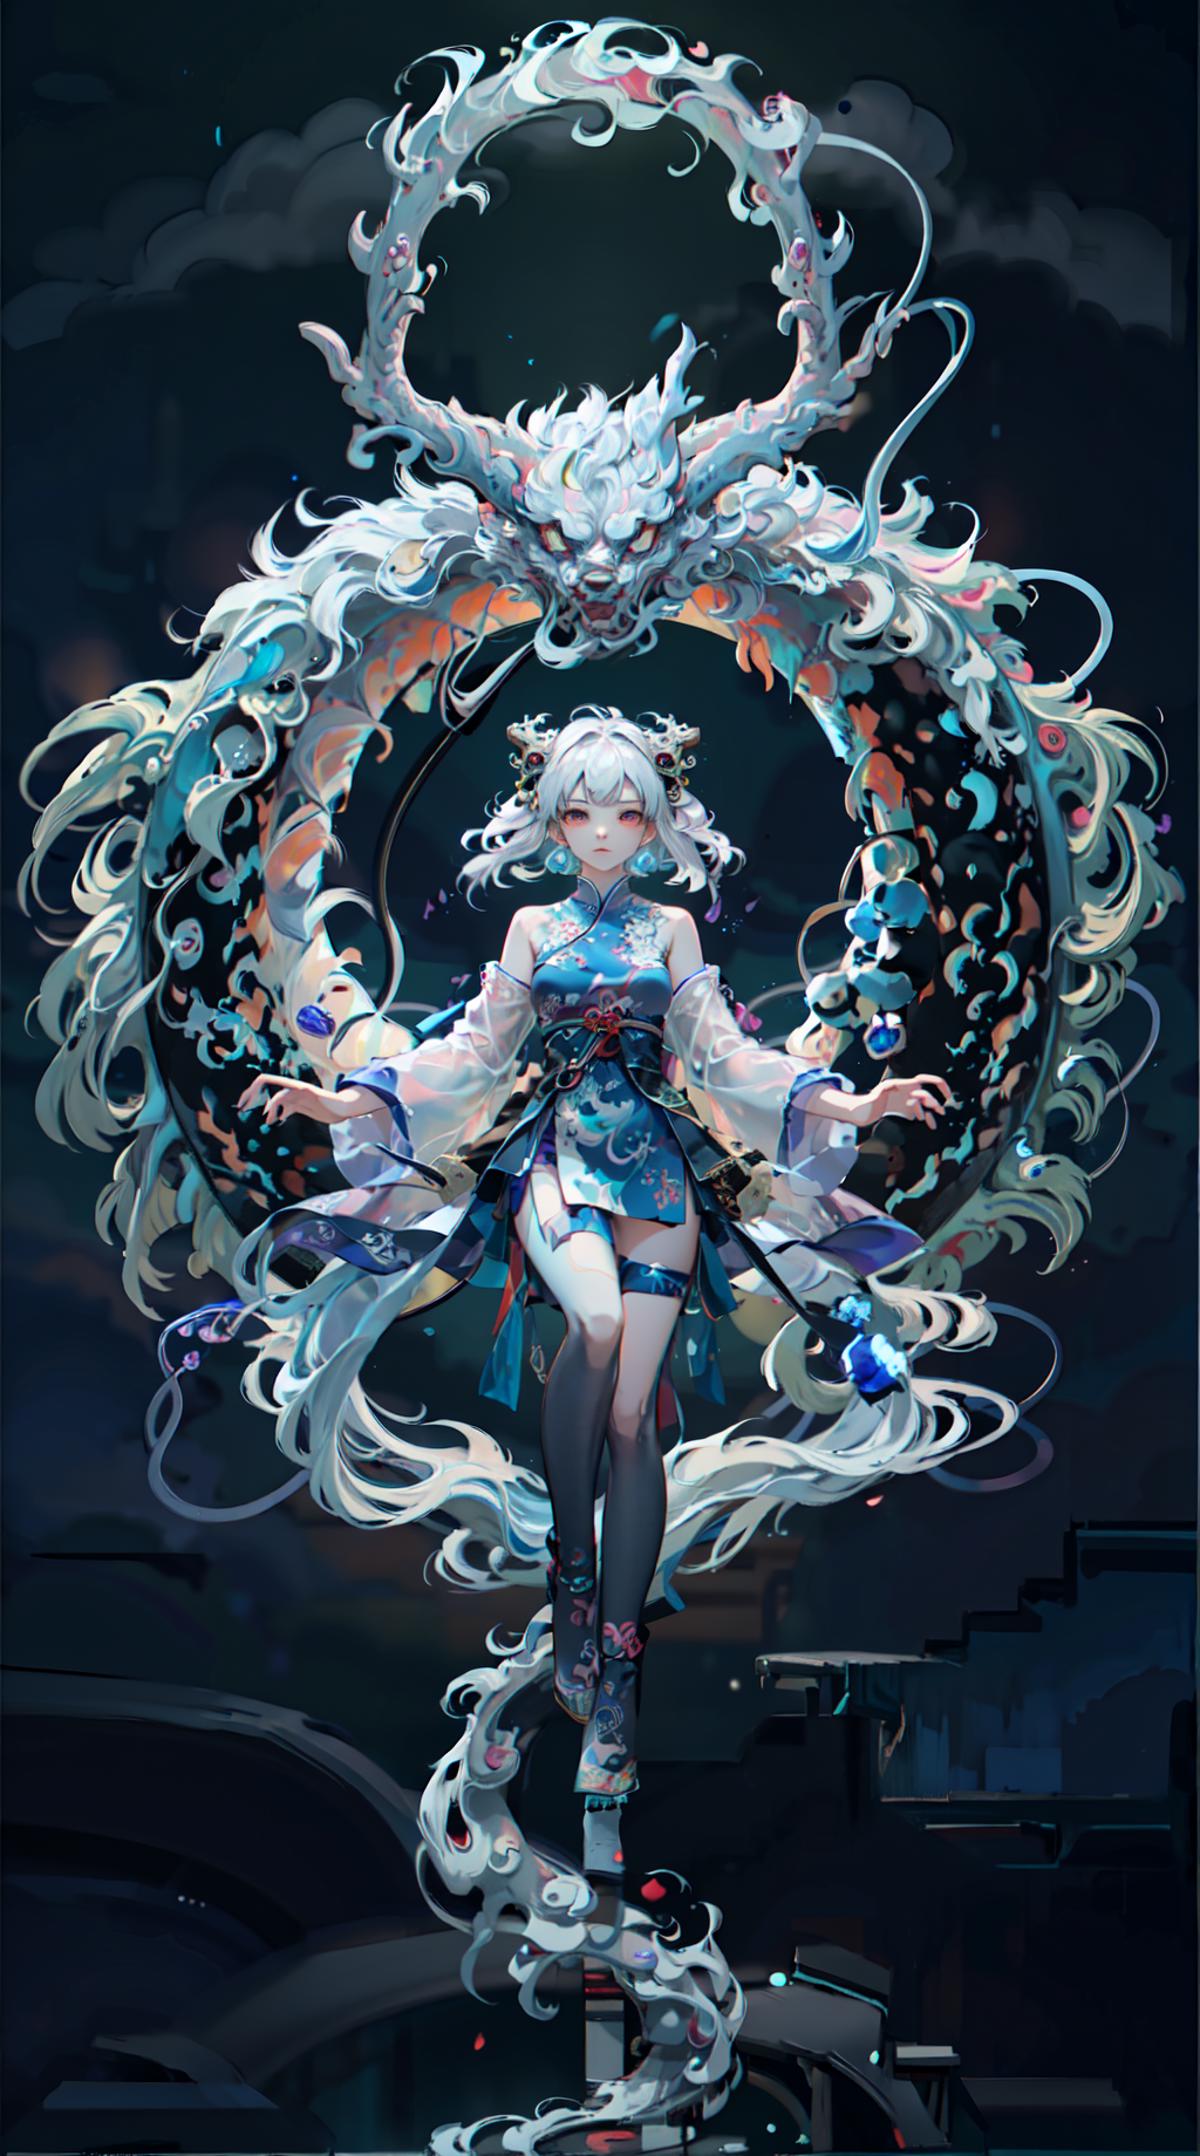 Anime character with long hair and blue dress in front of a dragon.